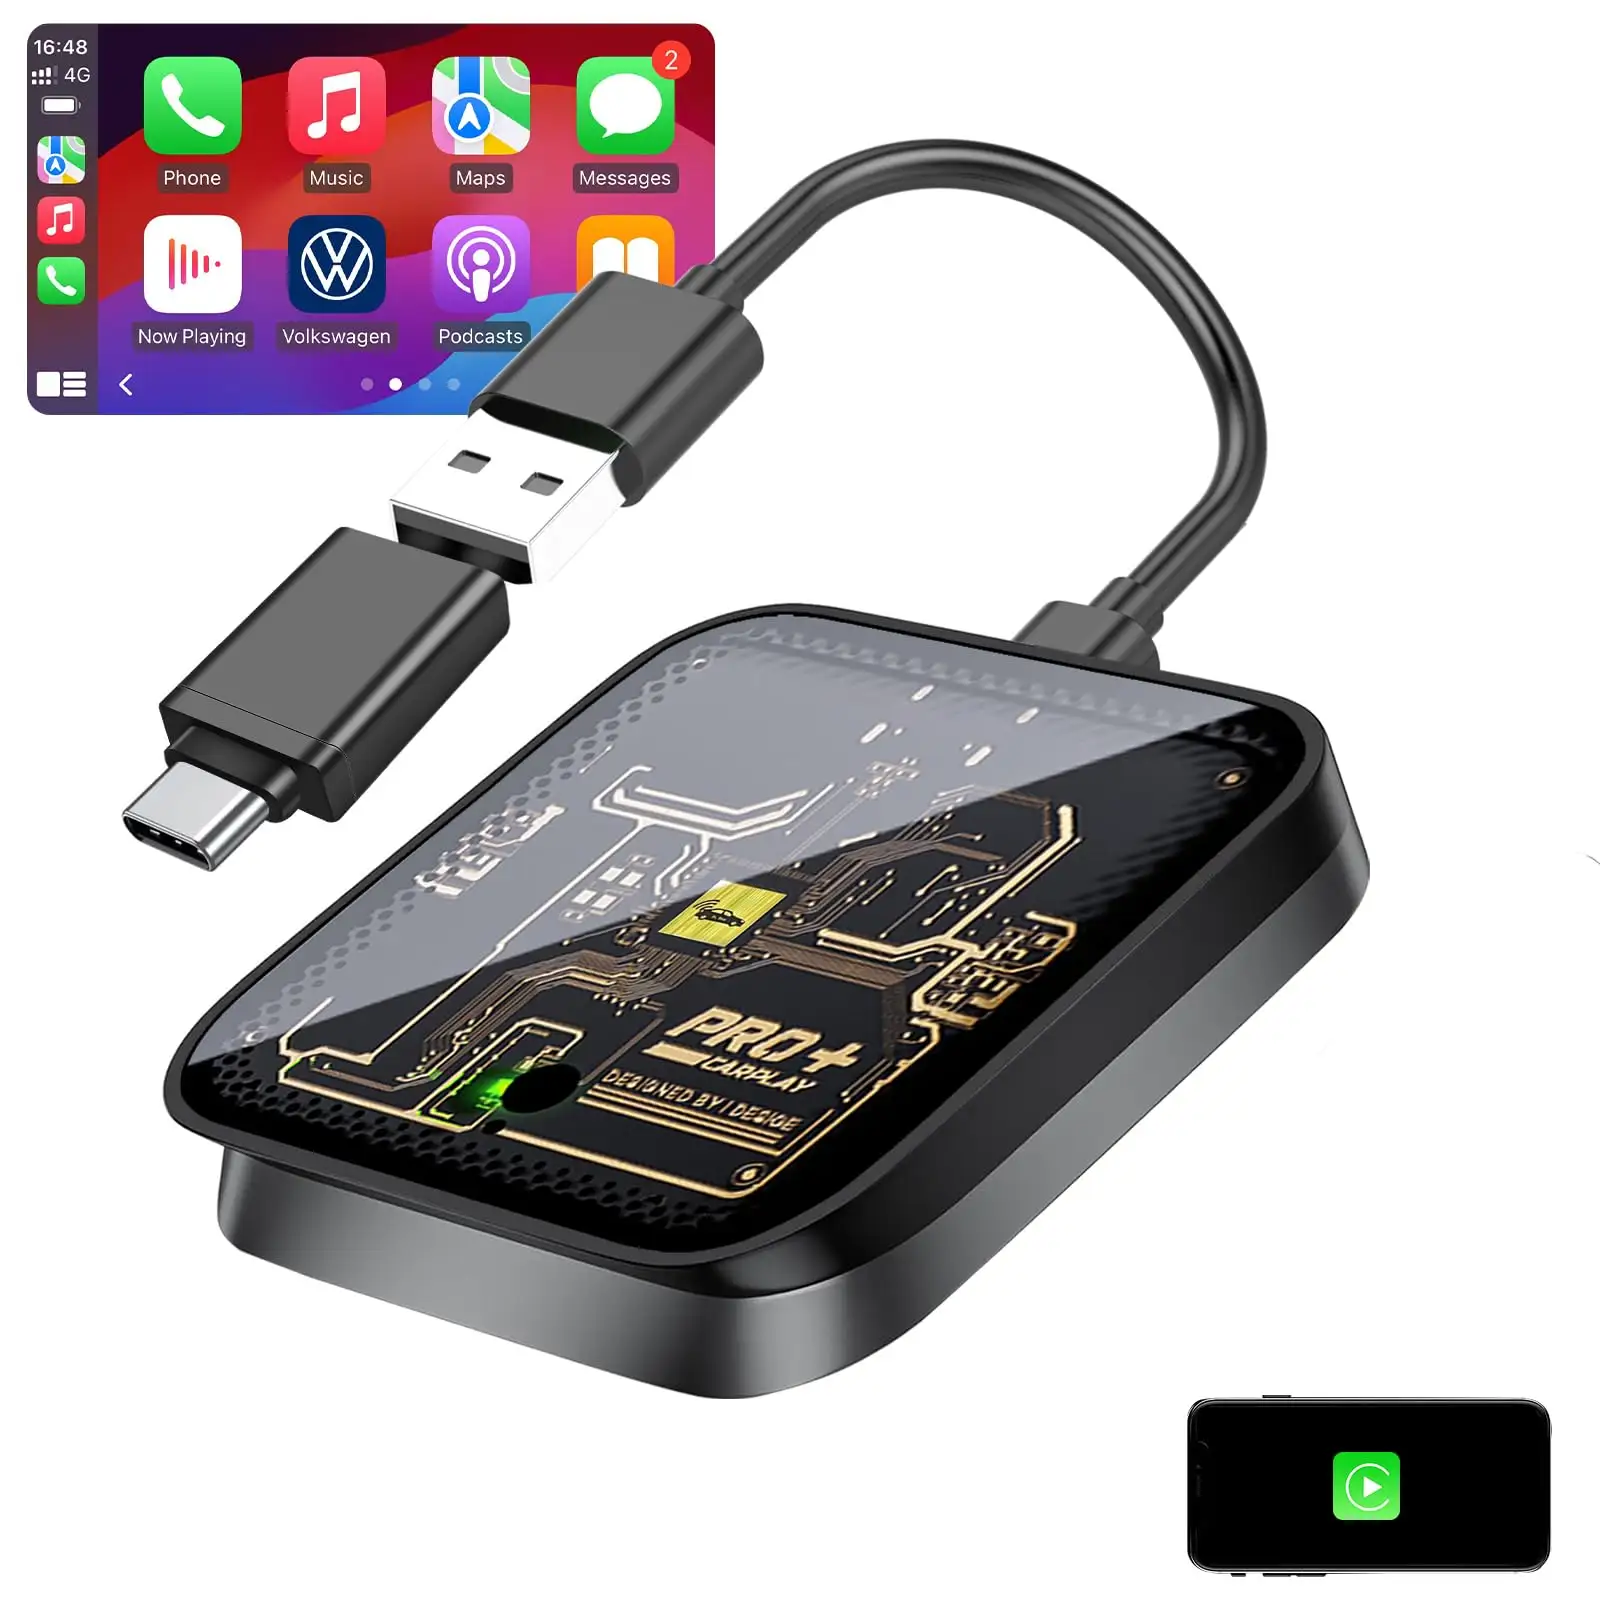 Phoebus Link portable Carplay wireless adapter supply chain Android box for Car mini device Wireless carplay dongle